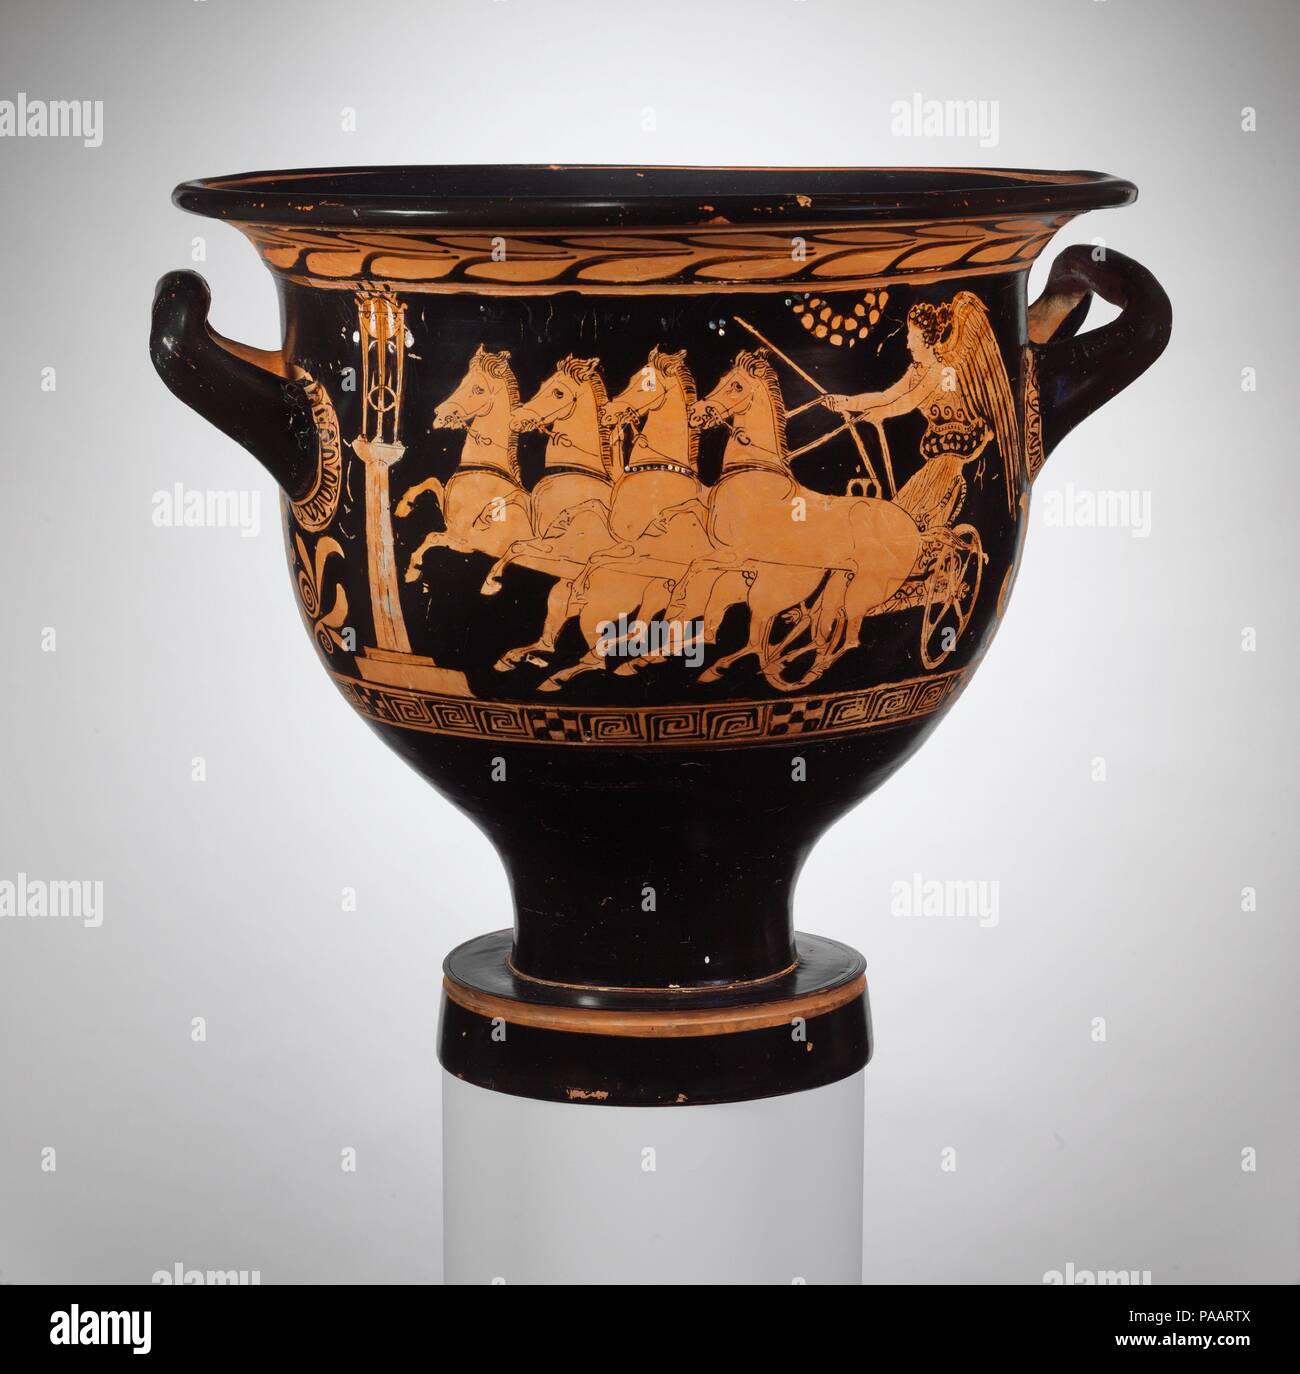 Terracotta bell-krater (bowl for mixing wine and water). Culture: Greek, Attic. Dimensions: Other: 14 3/4 x 15 5/8 (37.5 x 39.7 cm). Date: late 5th century B.C.. Obverse, Nike personification